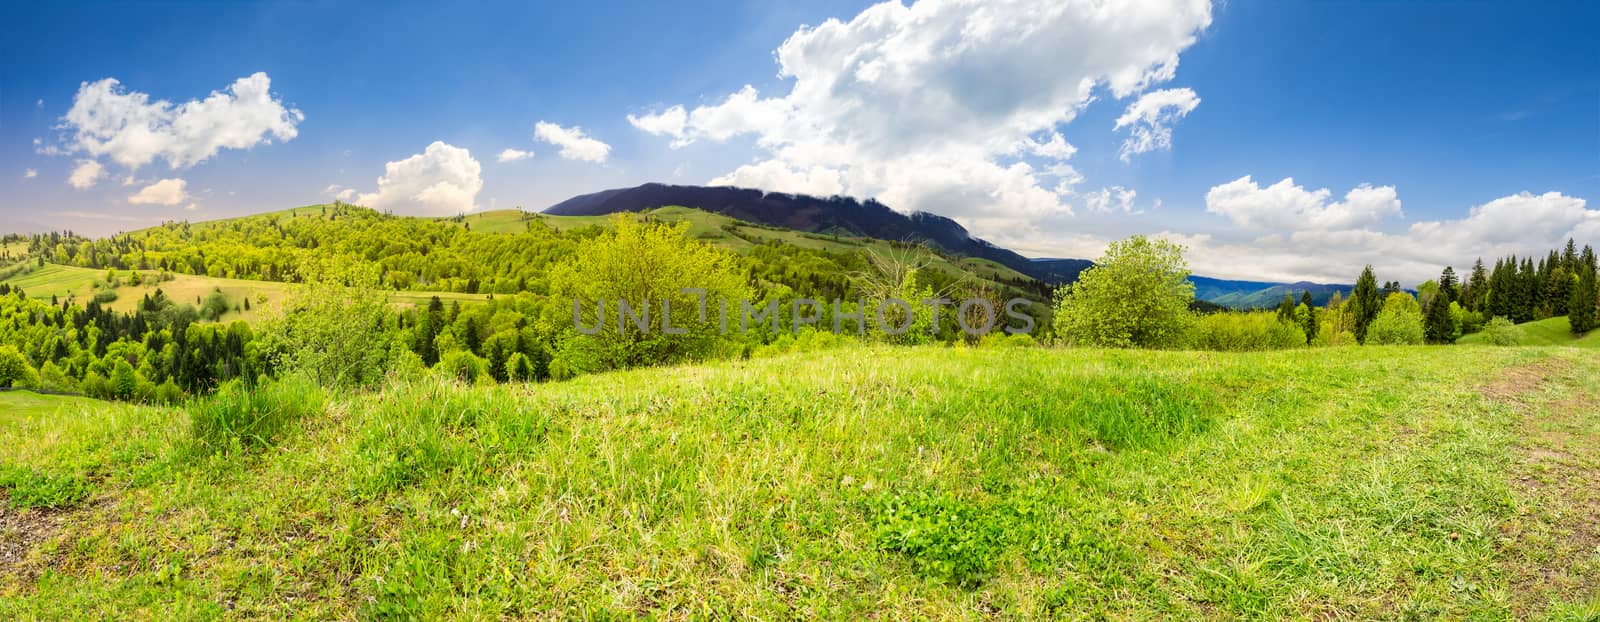 panoramic mountain landscape. green grass on meadow near mixed forest in mountains